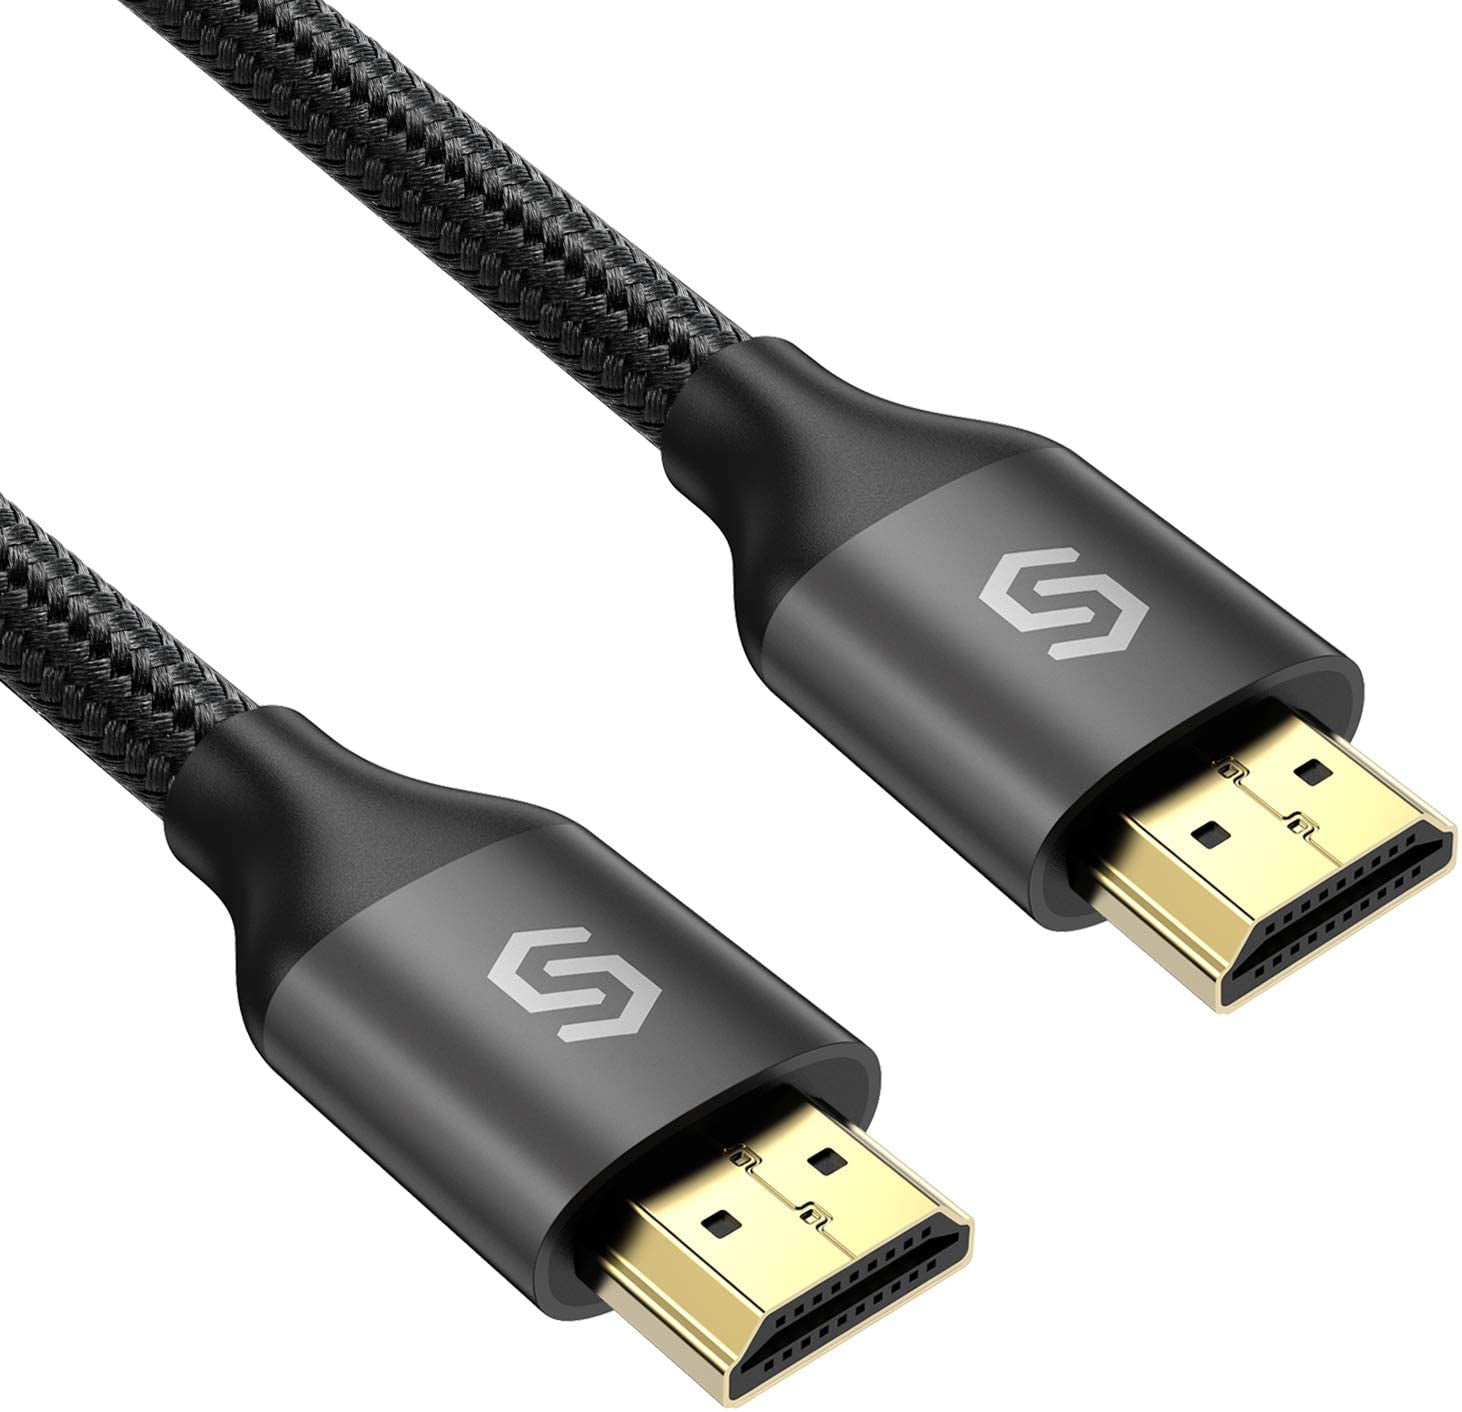 4K Braided Premium HDMI Cable v2.0 High-Speed Cable Lead 3D Ultra HDTV PS4 Xbox 